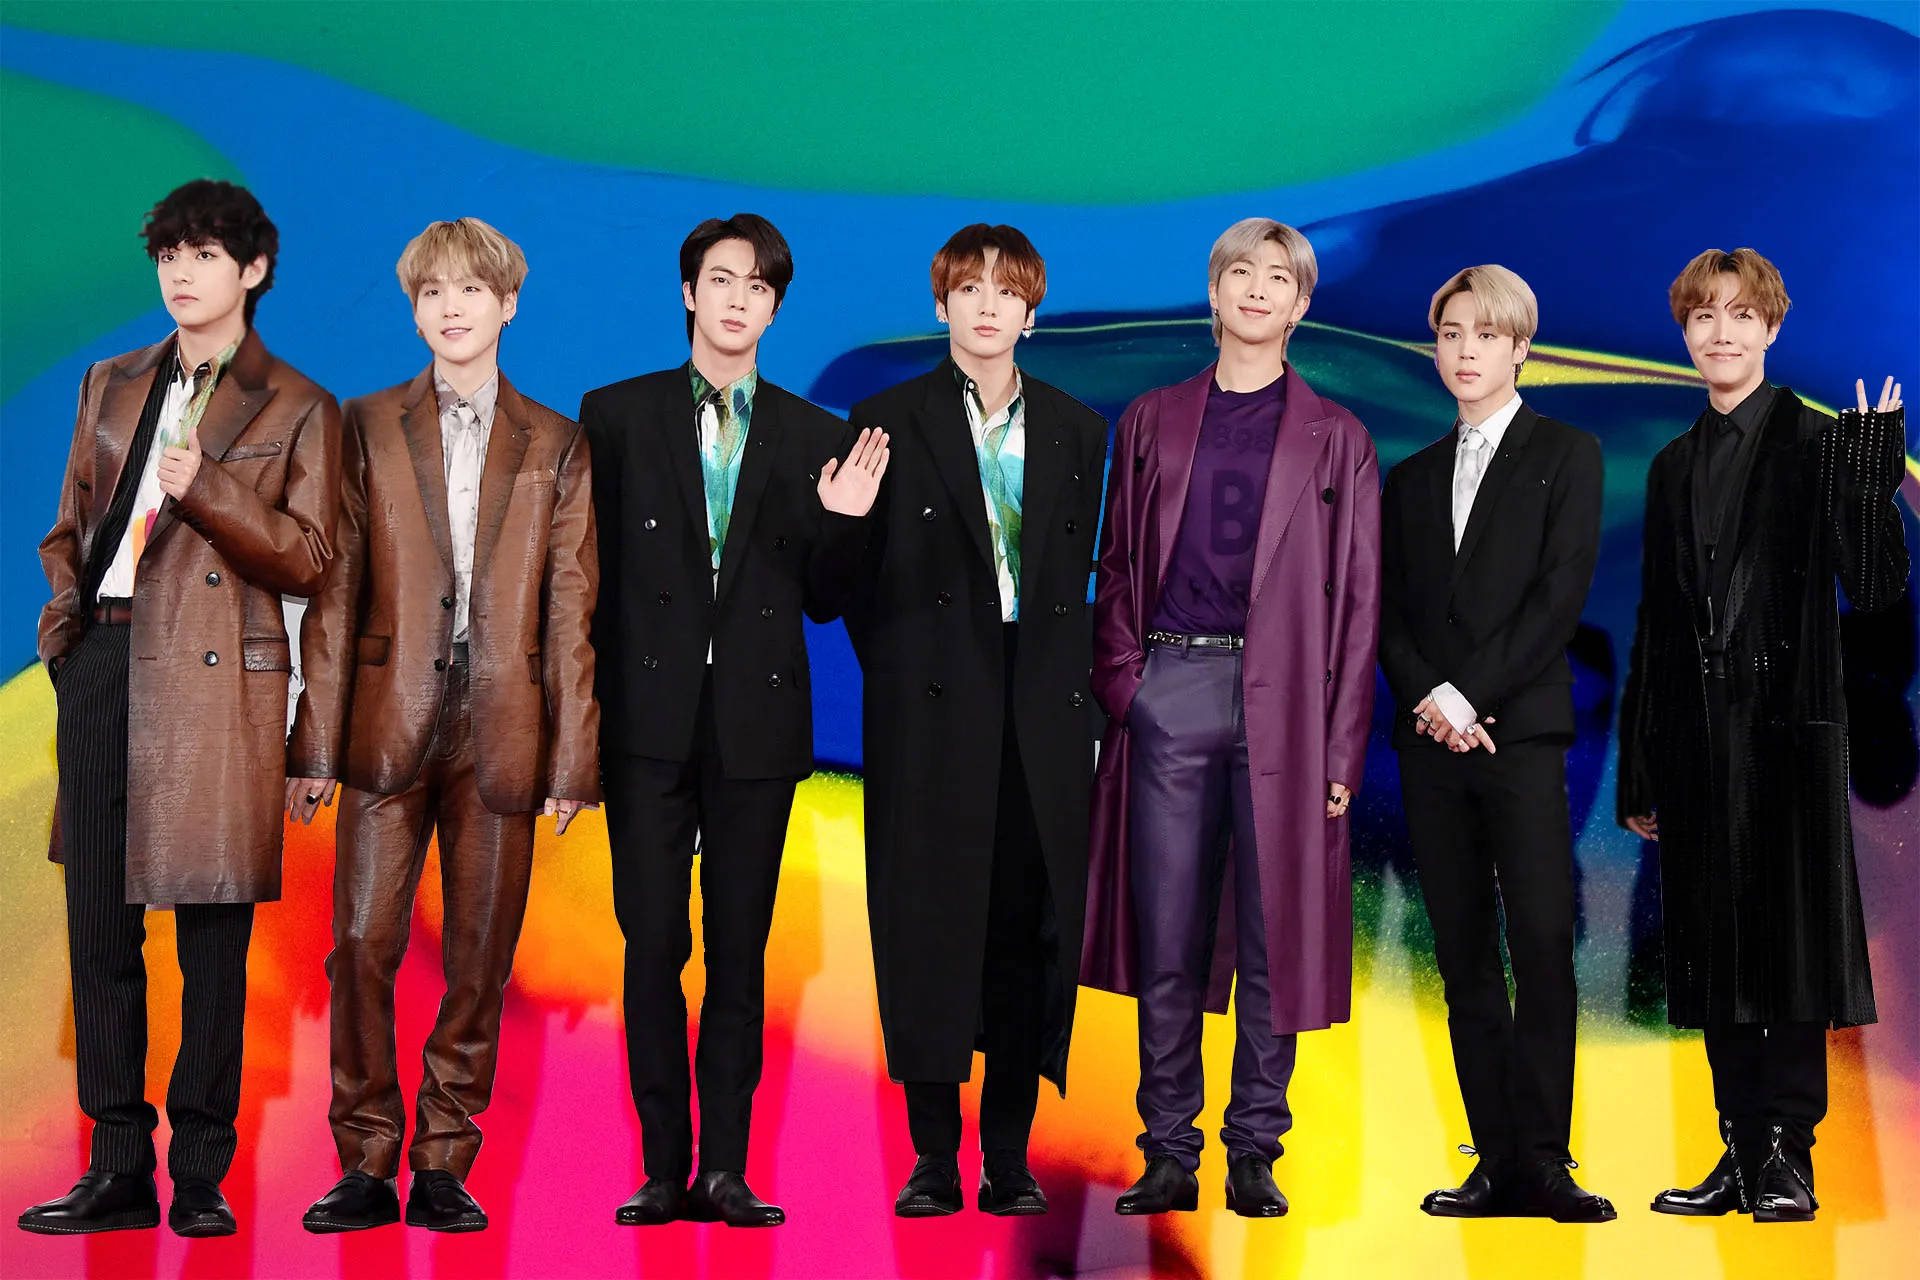 Cute Bts Group On Stage With Rainbow Backdrop Background